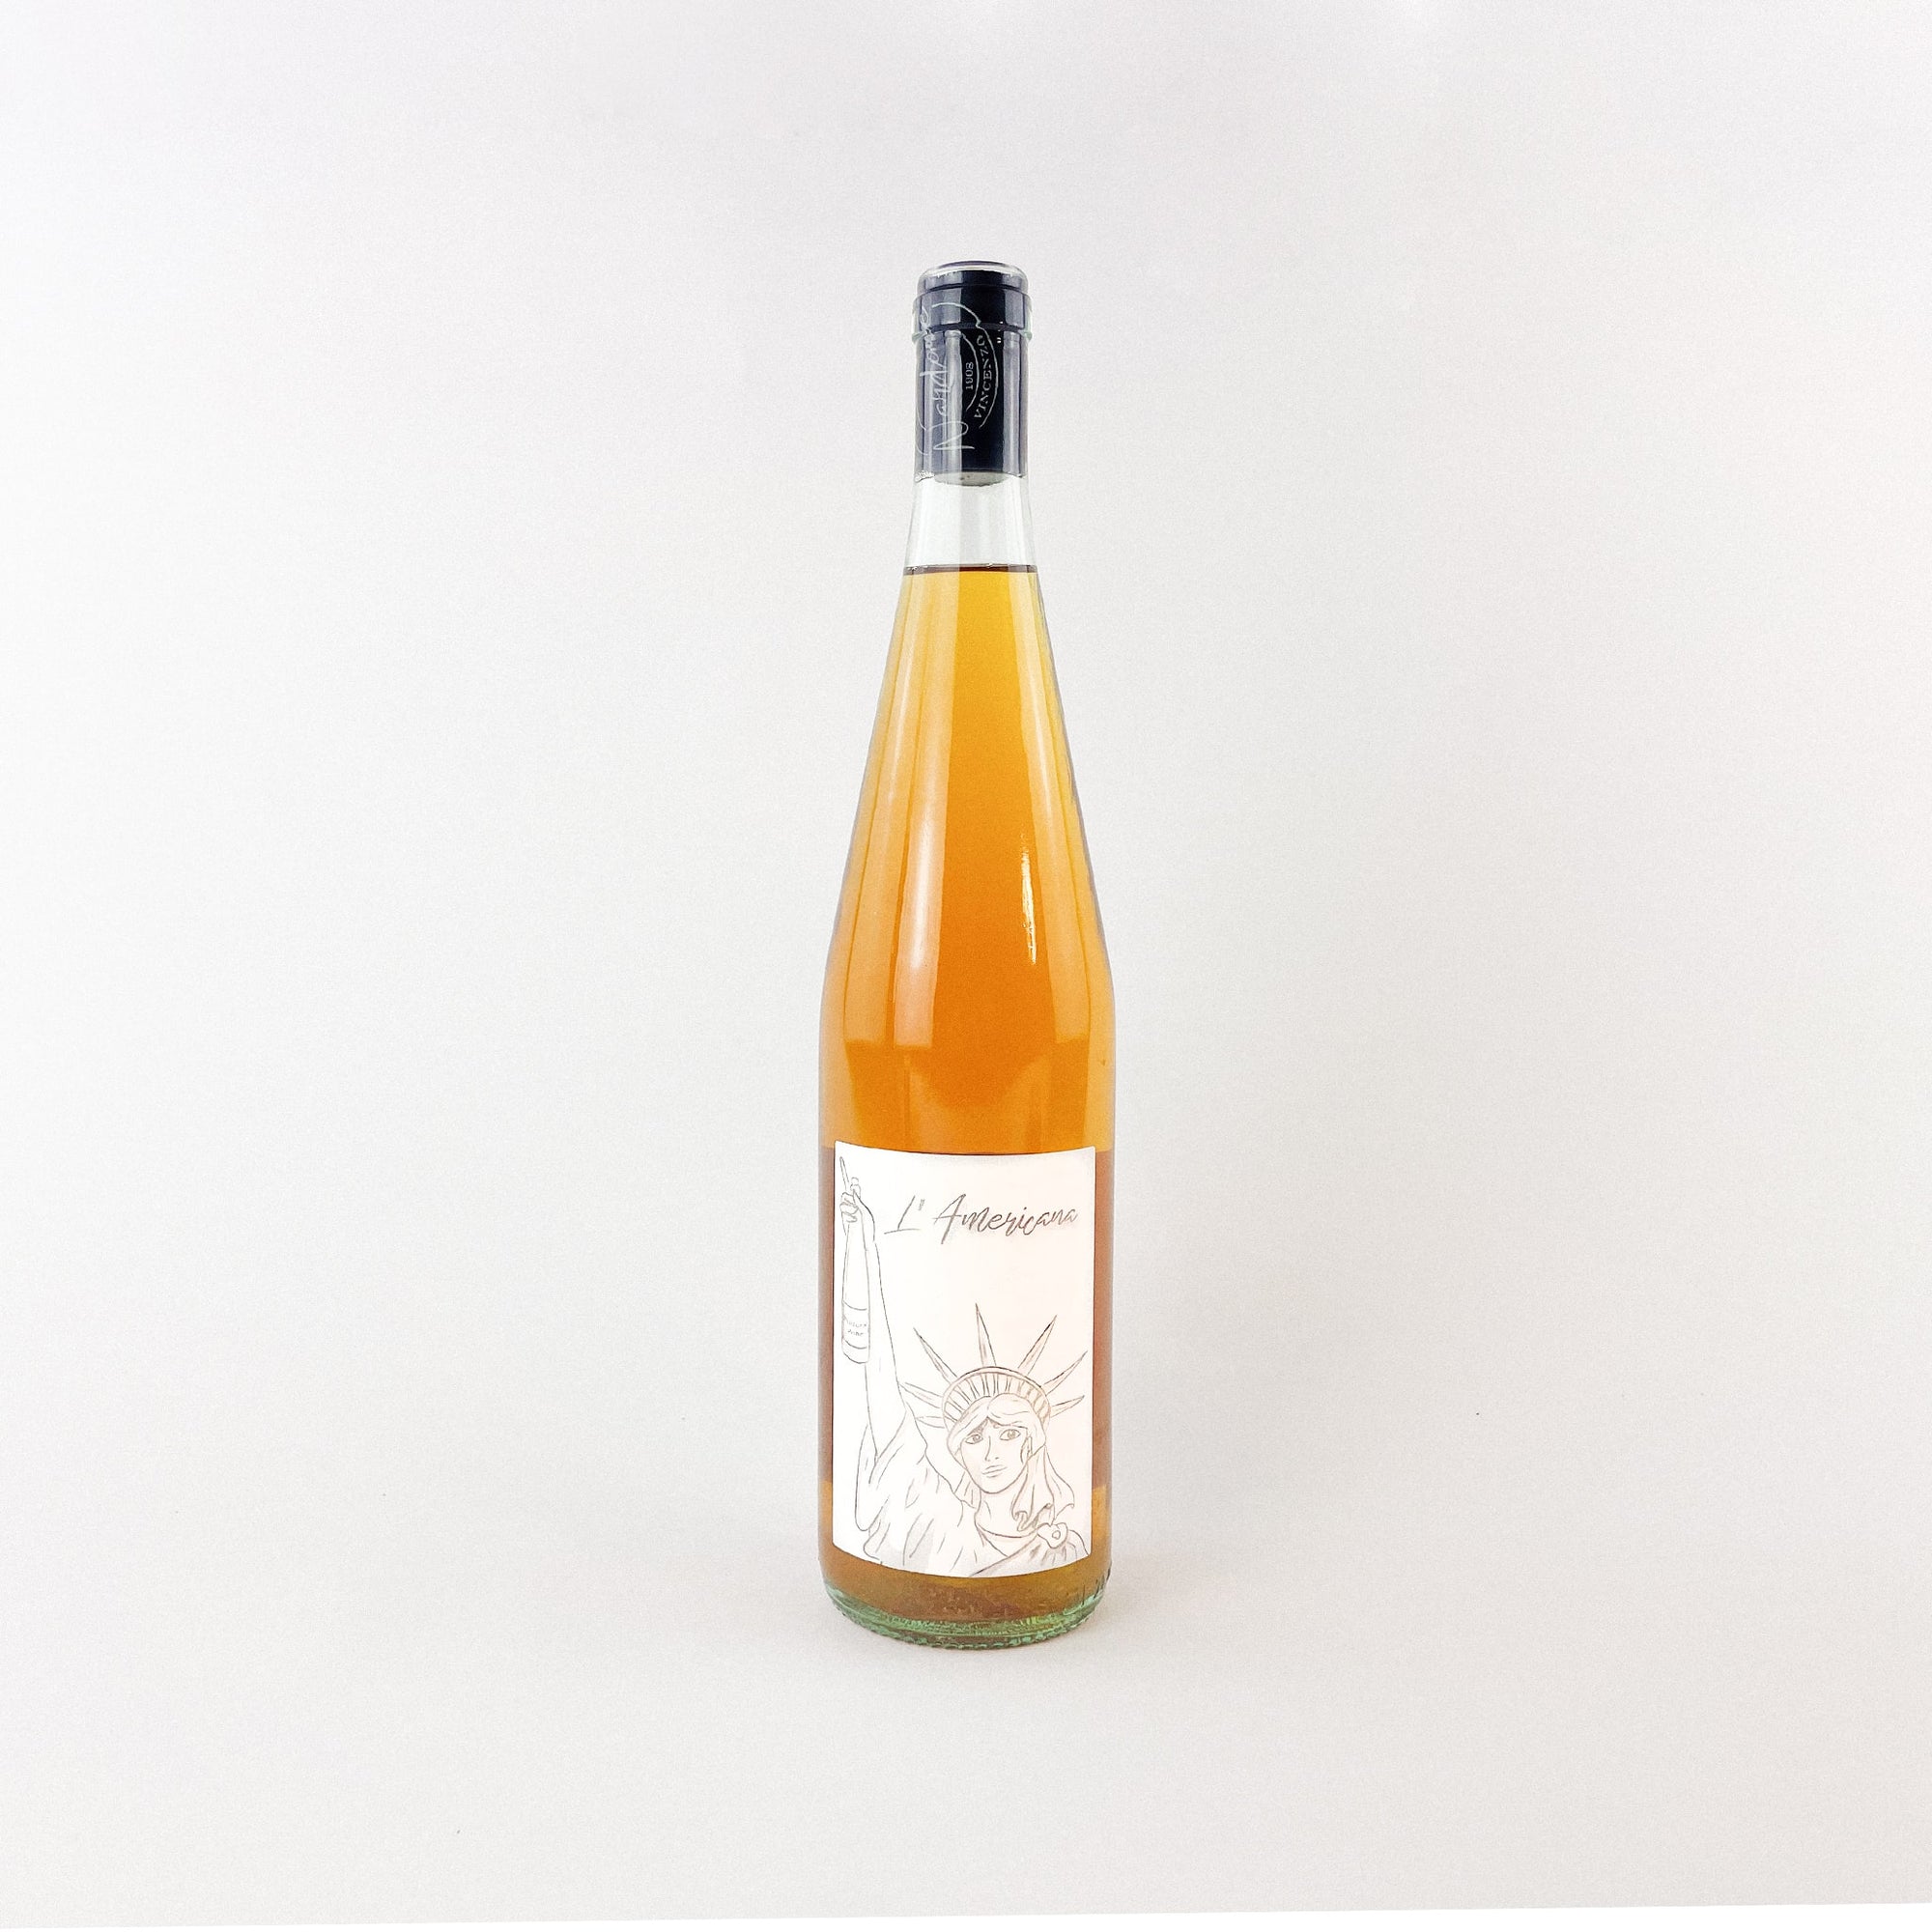 A bottle of an orange natural wine by tenuta vincenzo nardone front view